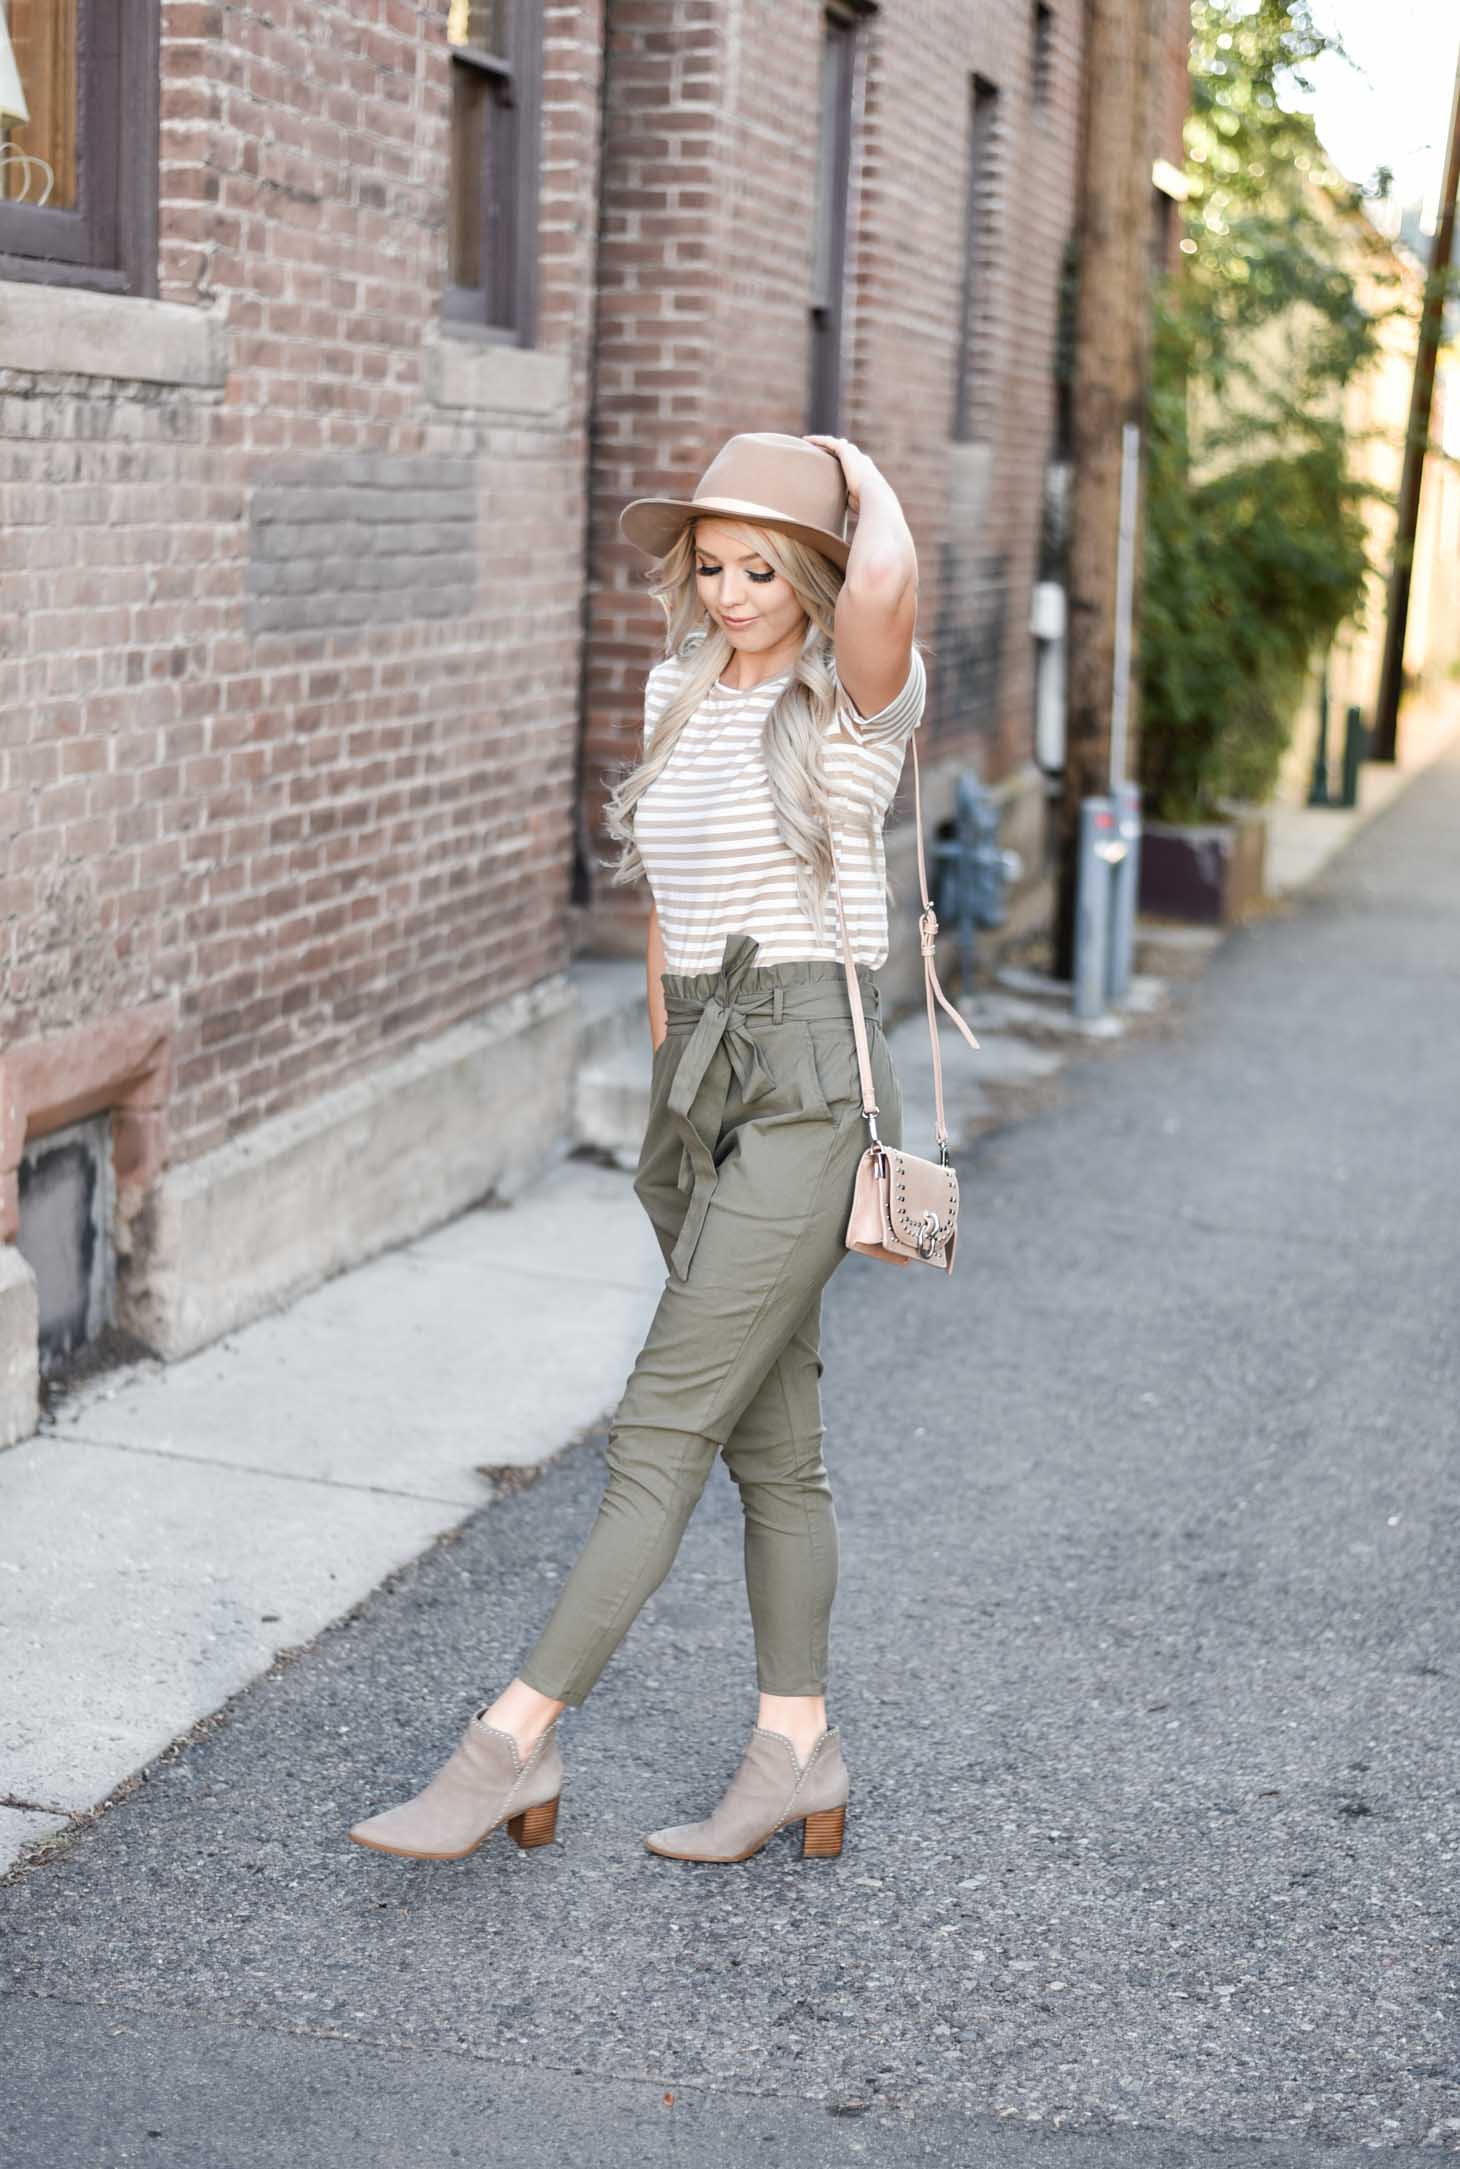 Erin Elizabeth of Wink and a Twirl shares the cutest high waist pants and striped top from Amaryllis Apparel